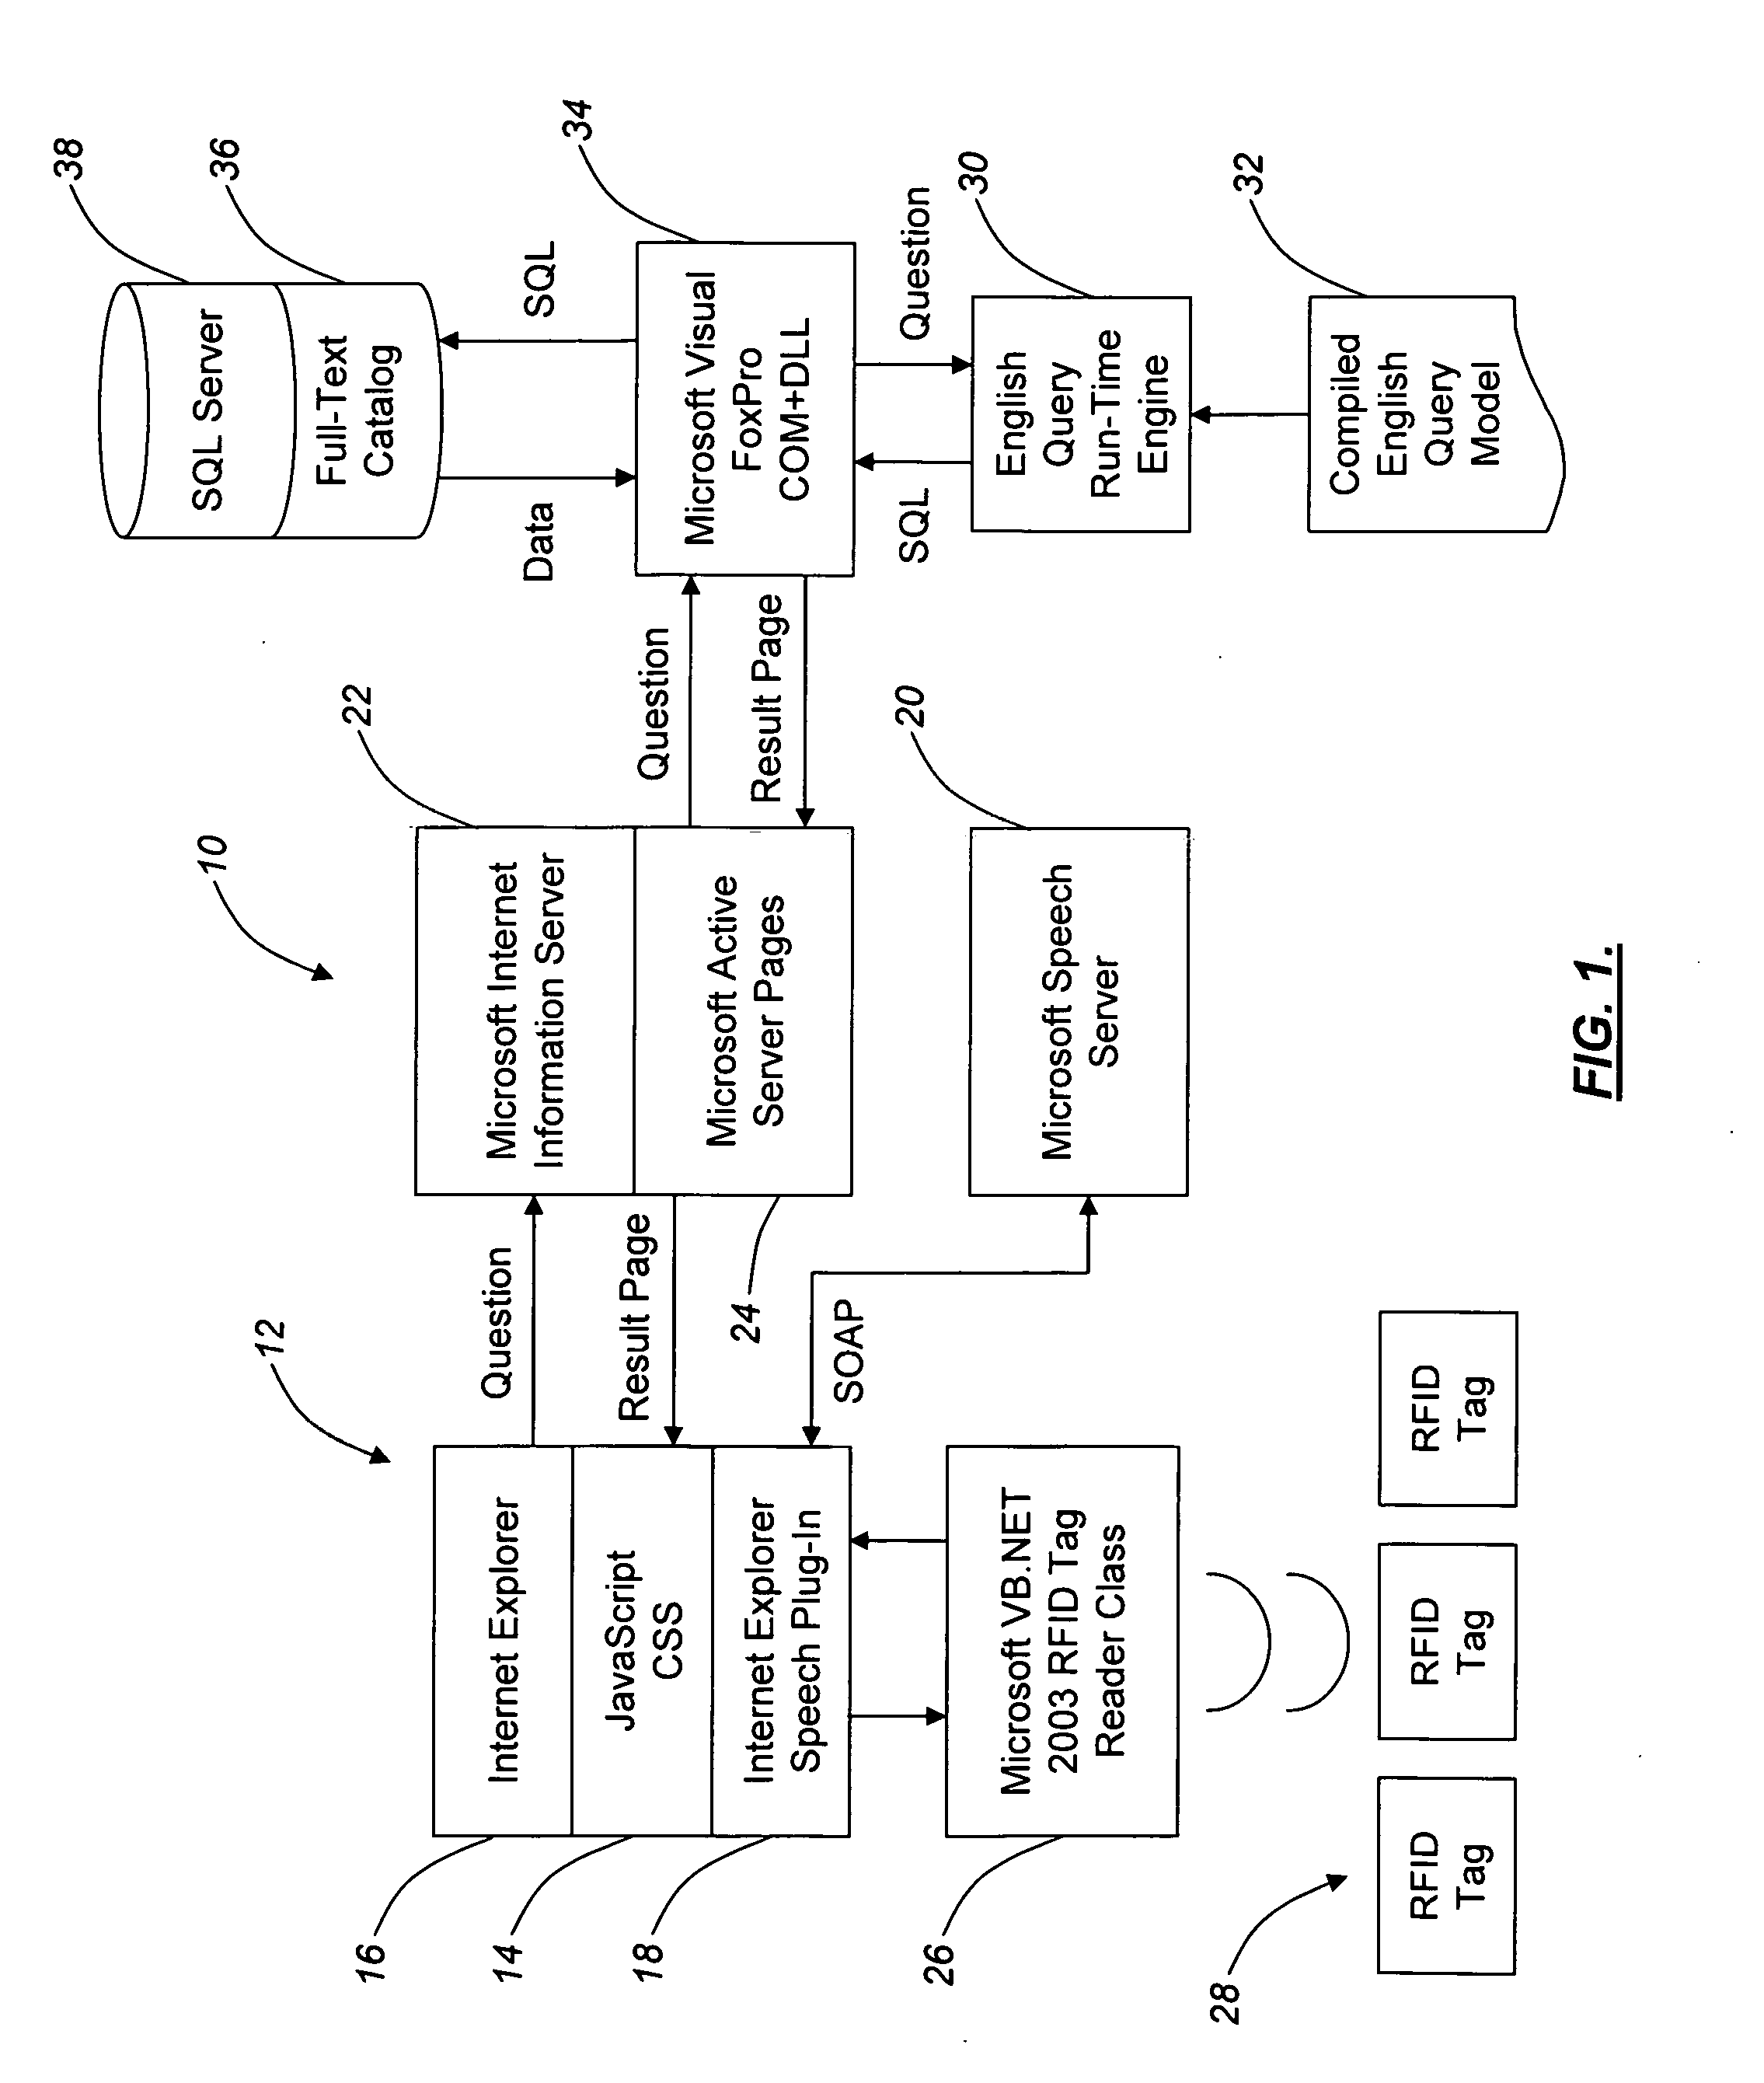 Multimodal natural language query system and architecture for processing voice and proximity-based queries